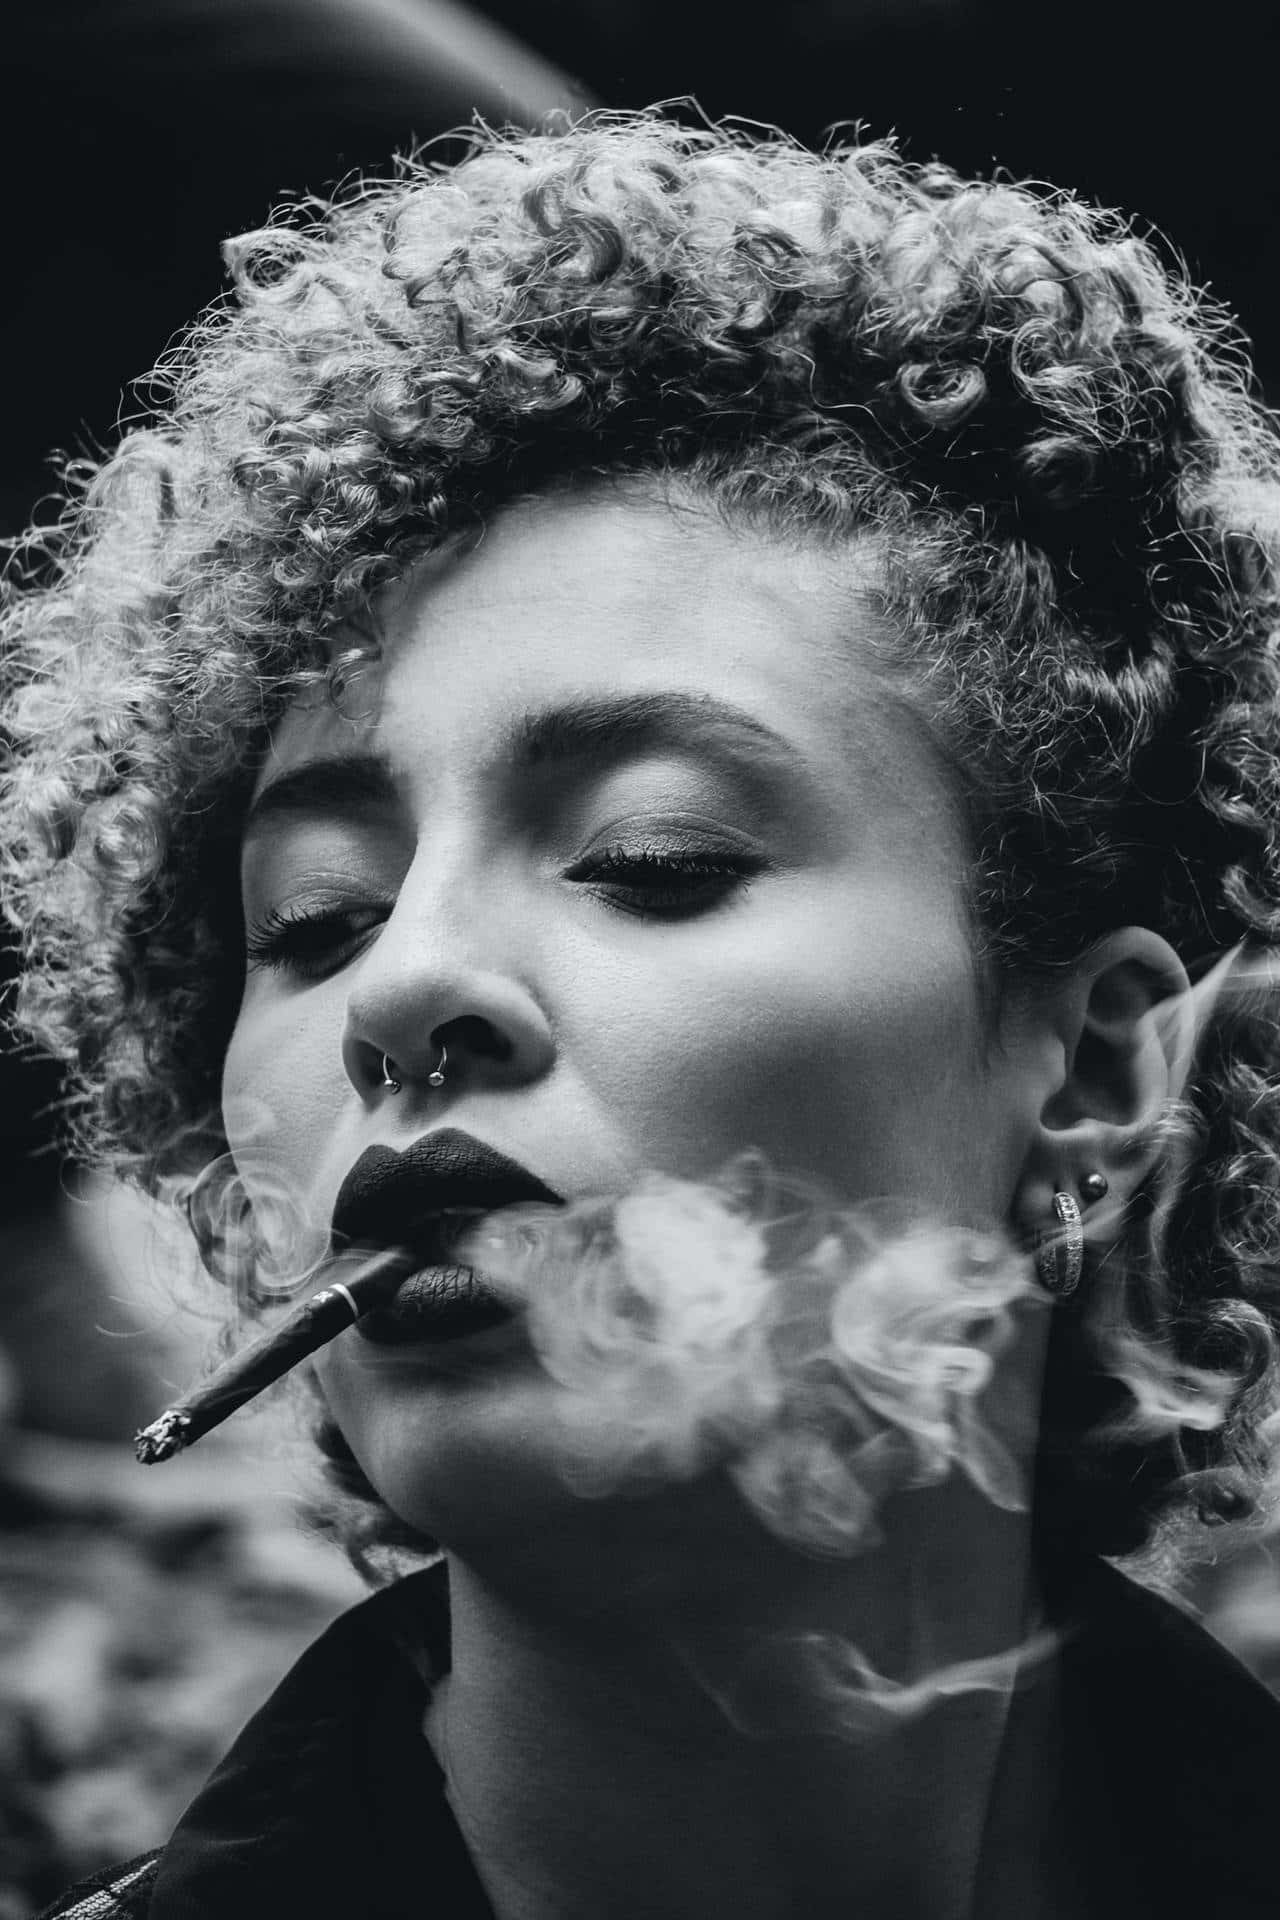 A carefree young woman with curly hair enjoying a serene moment with her cigarette Wallpaper